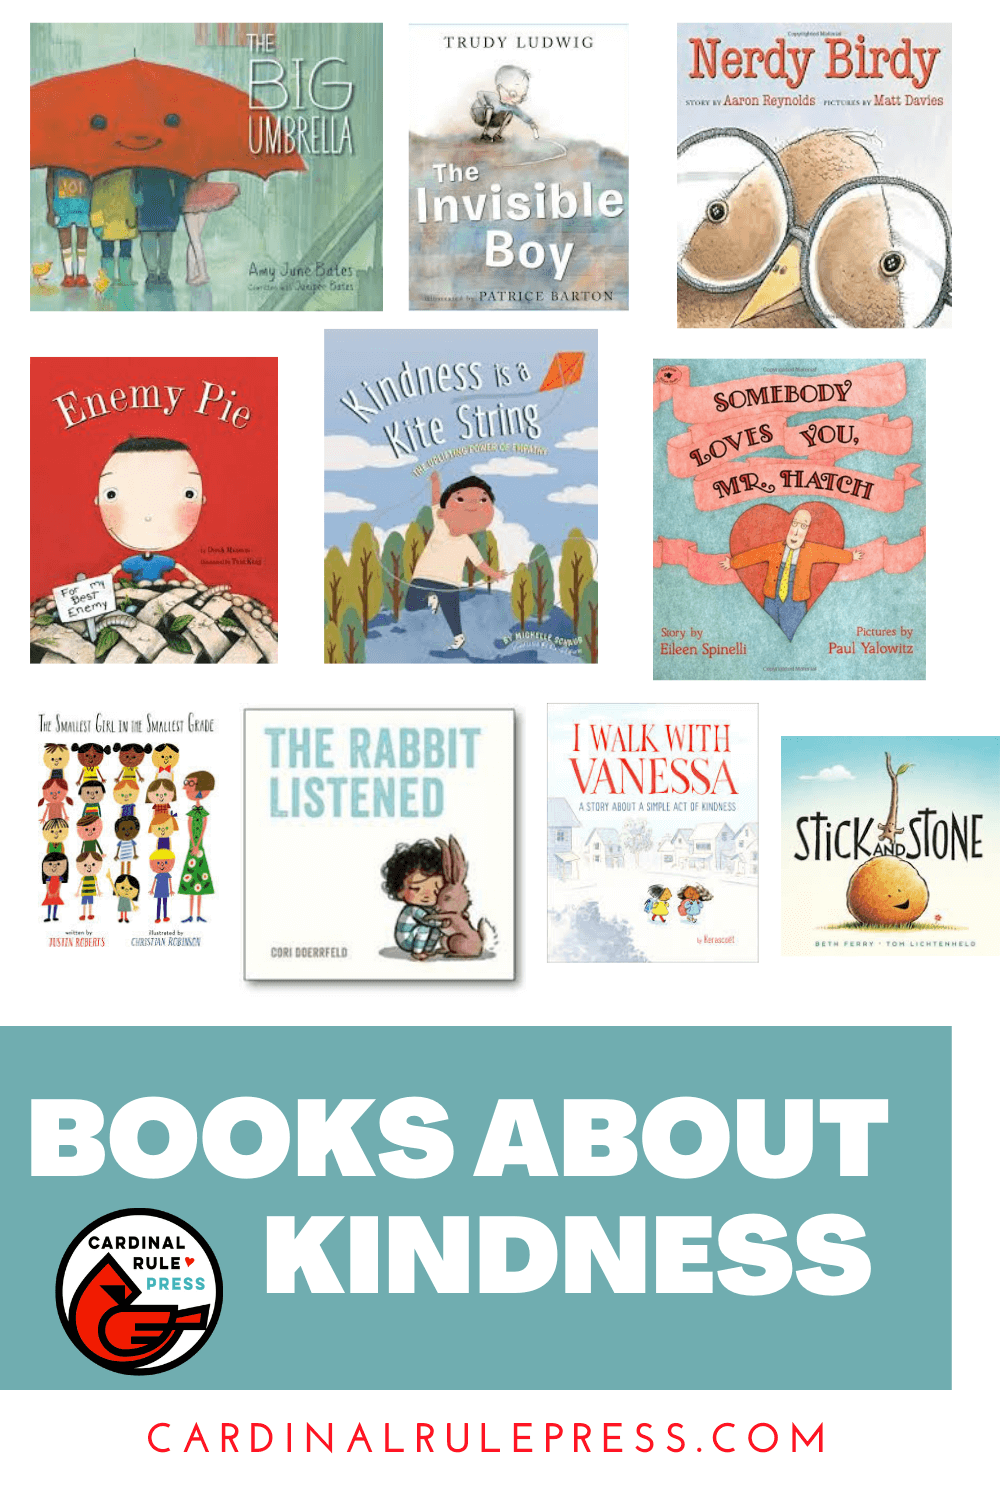 Books about Kindness. Cardinal Rule Press leads the way in providing messages that empower families, schools and communities through inspirational children’s books. #BooksToRead  #BooksWorthReading #BooksAboutKindness #Kindness